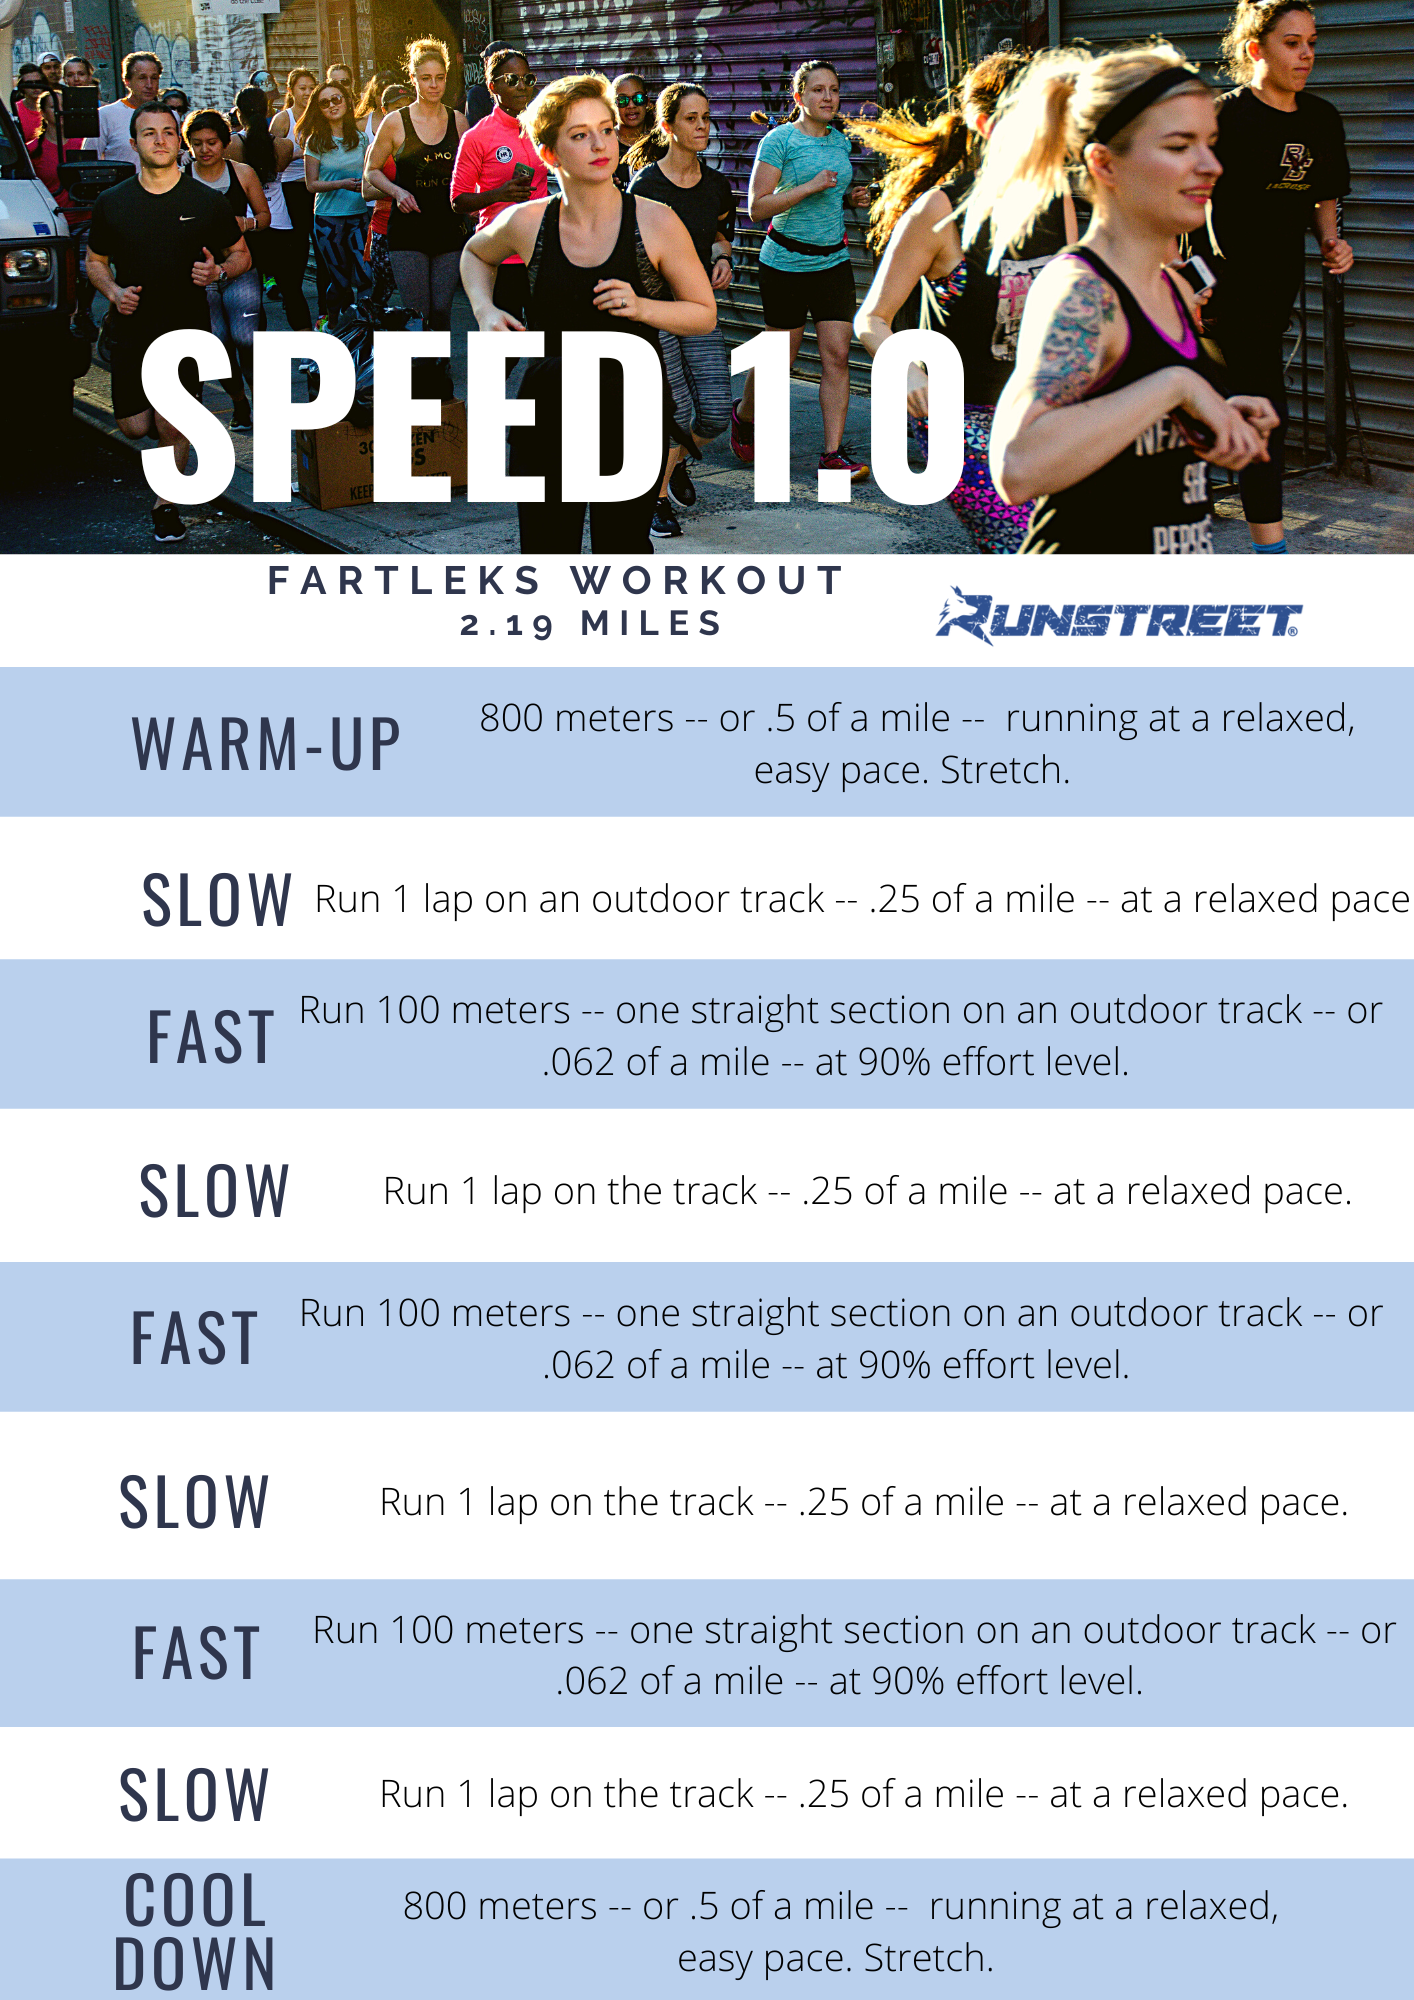 10 Running Workouts to Build Speed and Endurance — Runstreet